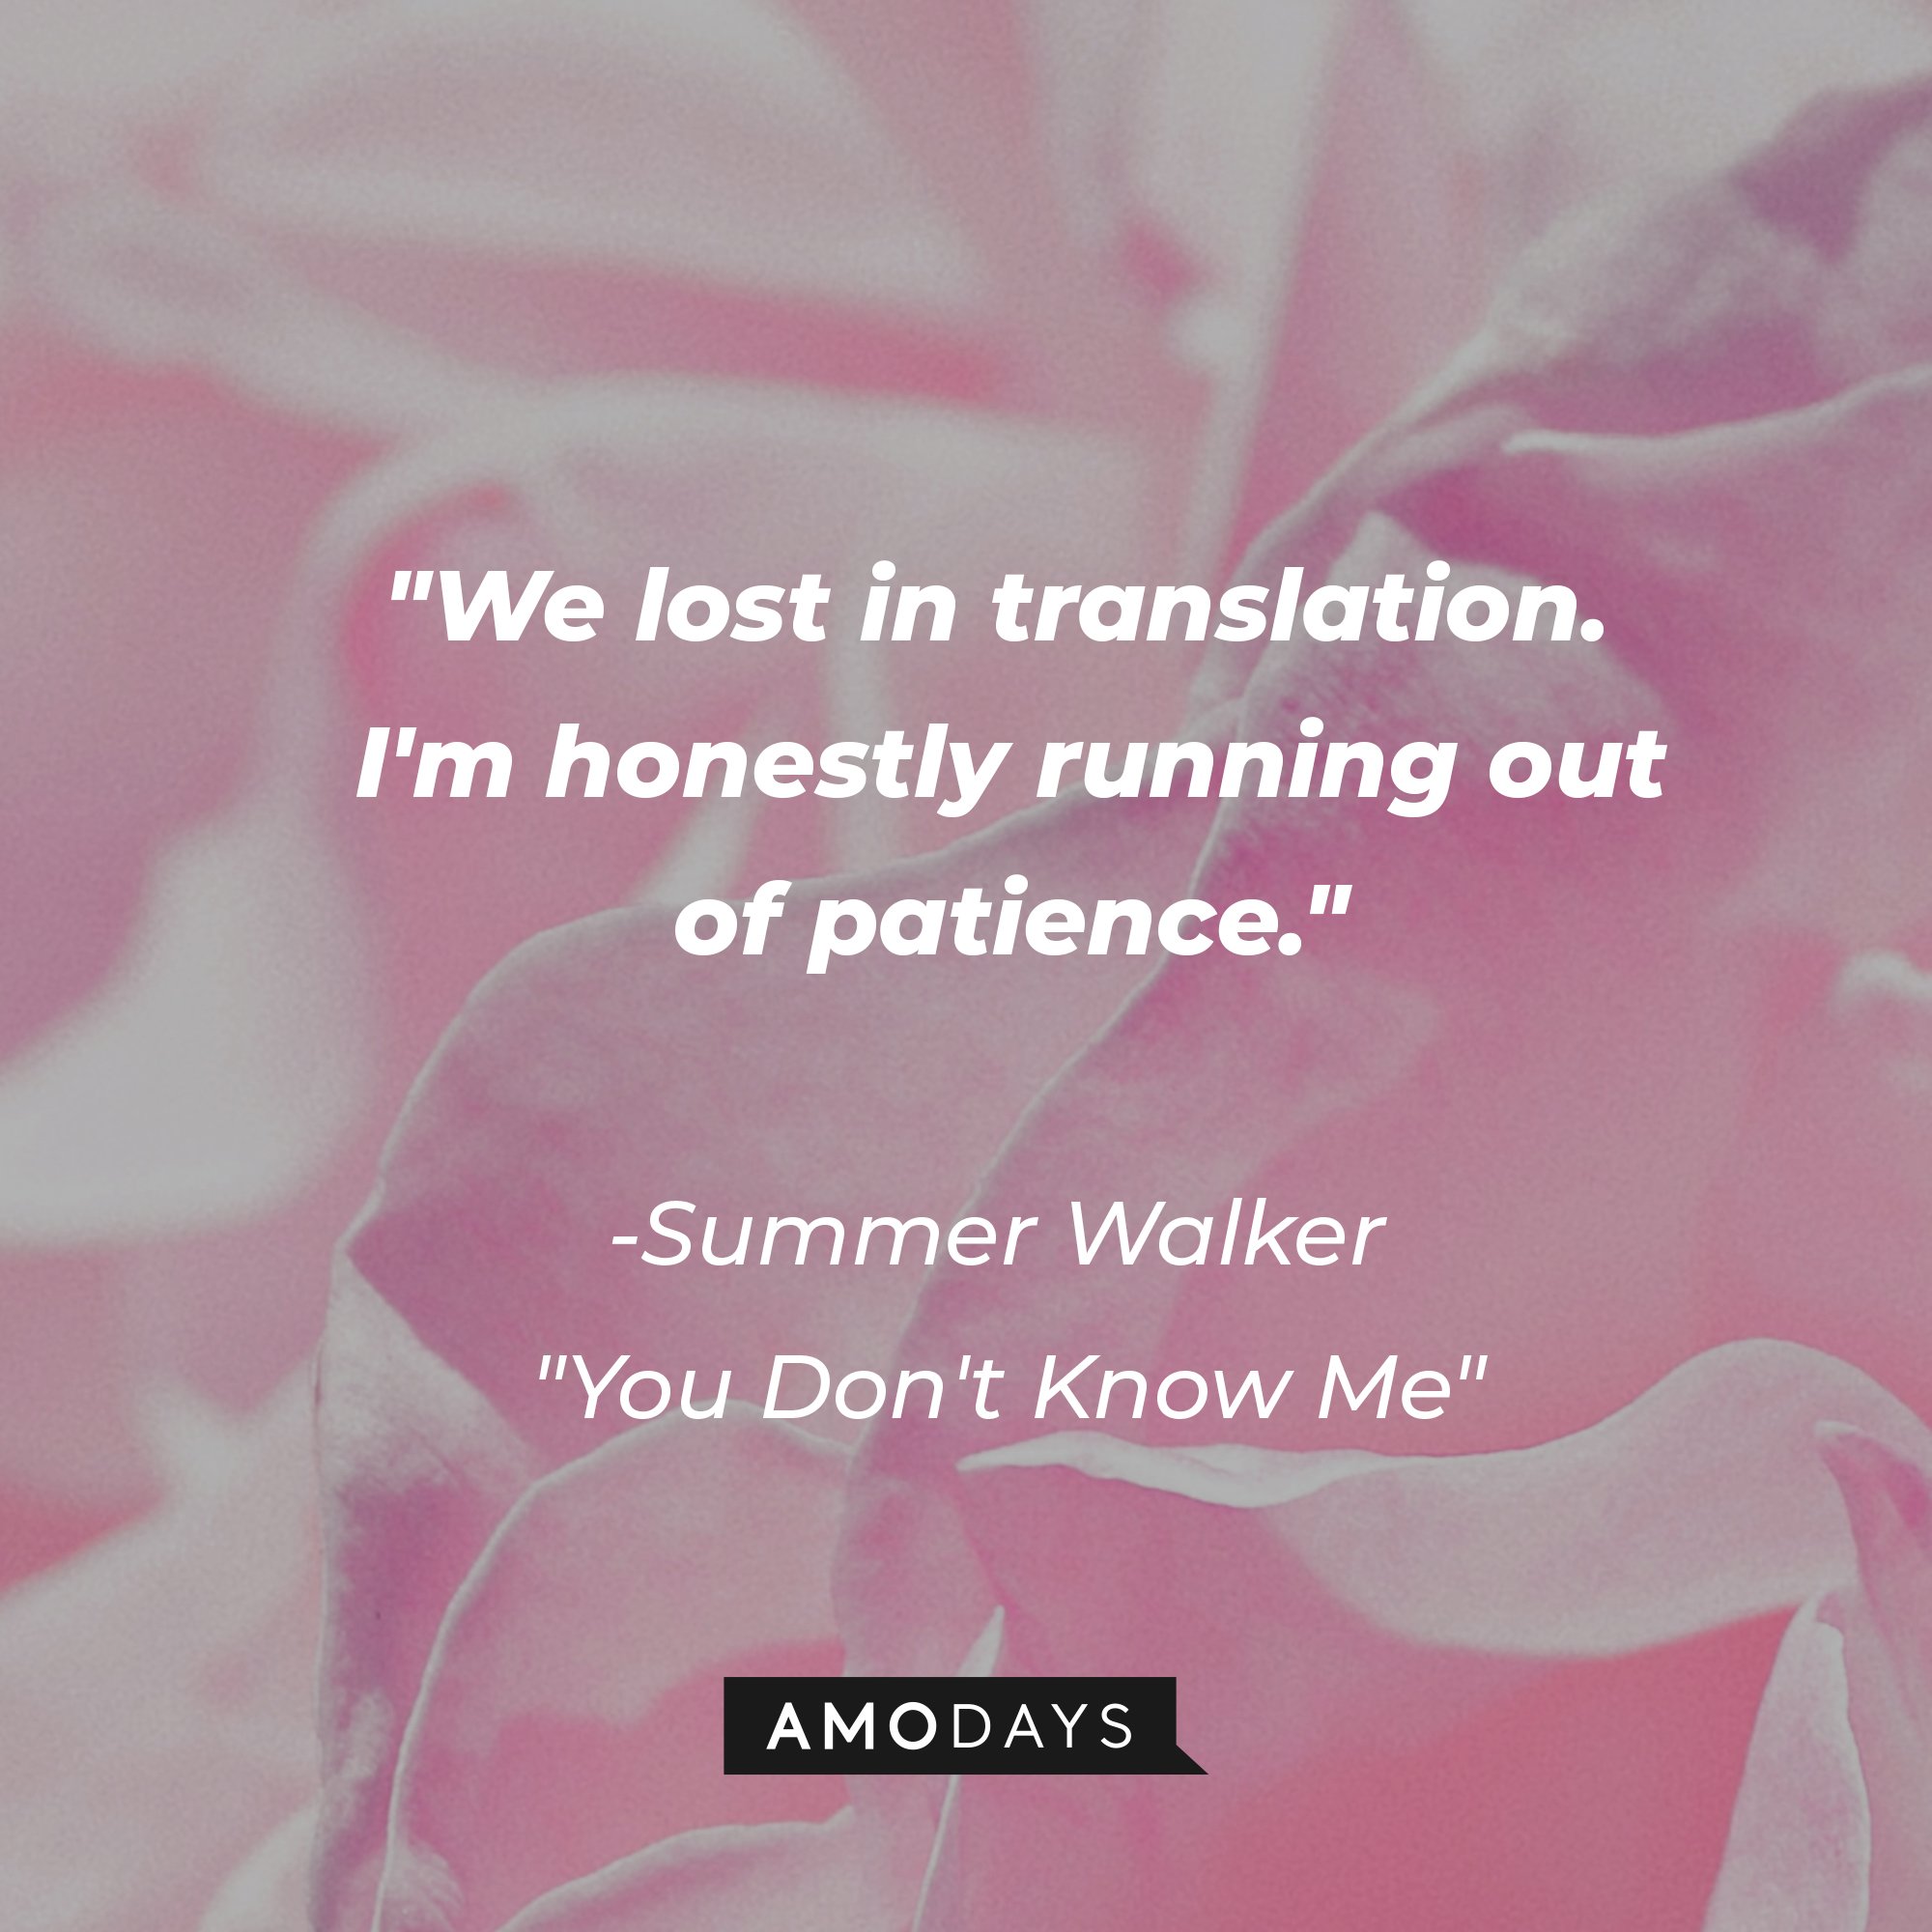 Summer Walker's "You Don't Know Me" quote: "We lost in translation. I'm honestly running out of patience." | Image: AmoDays